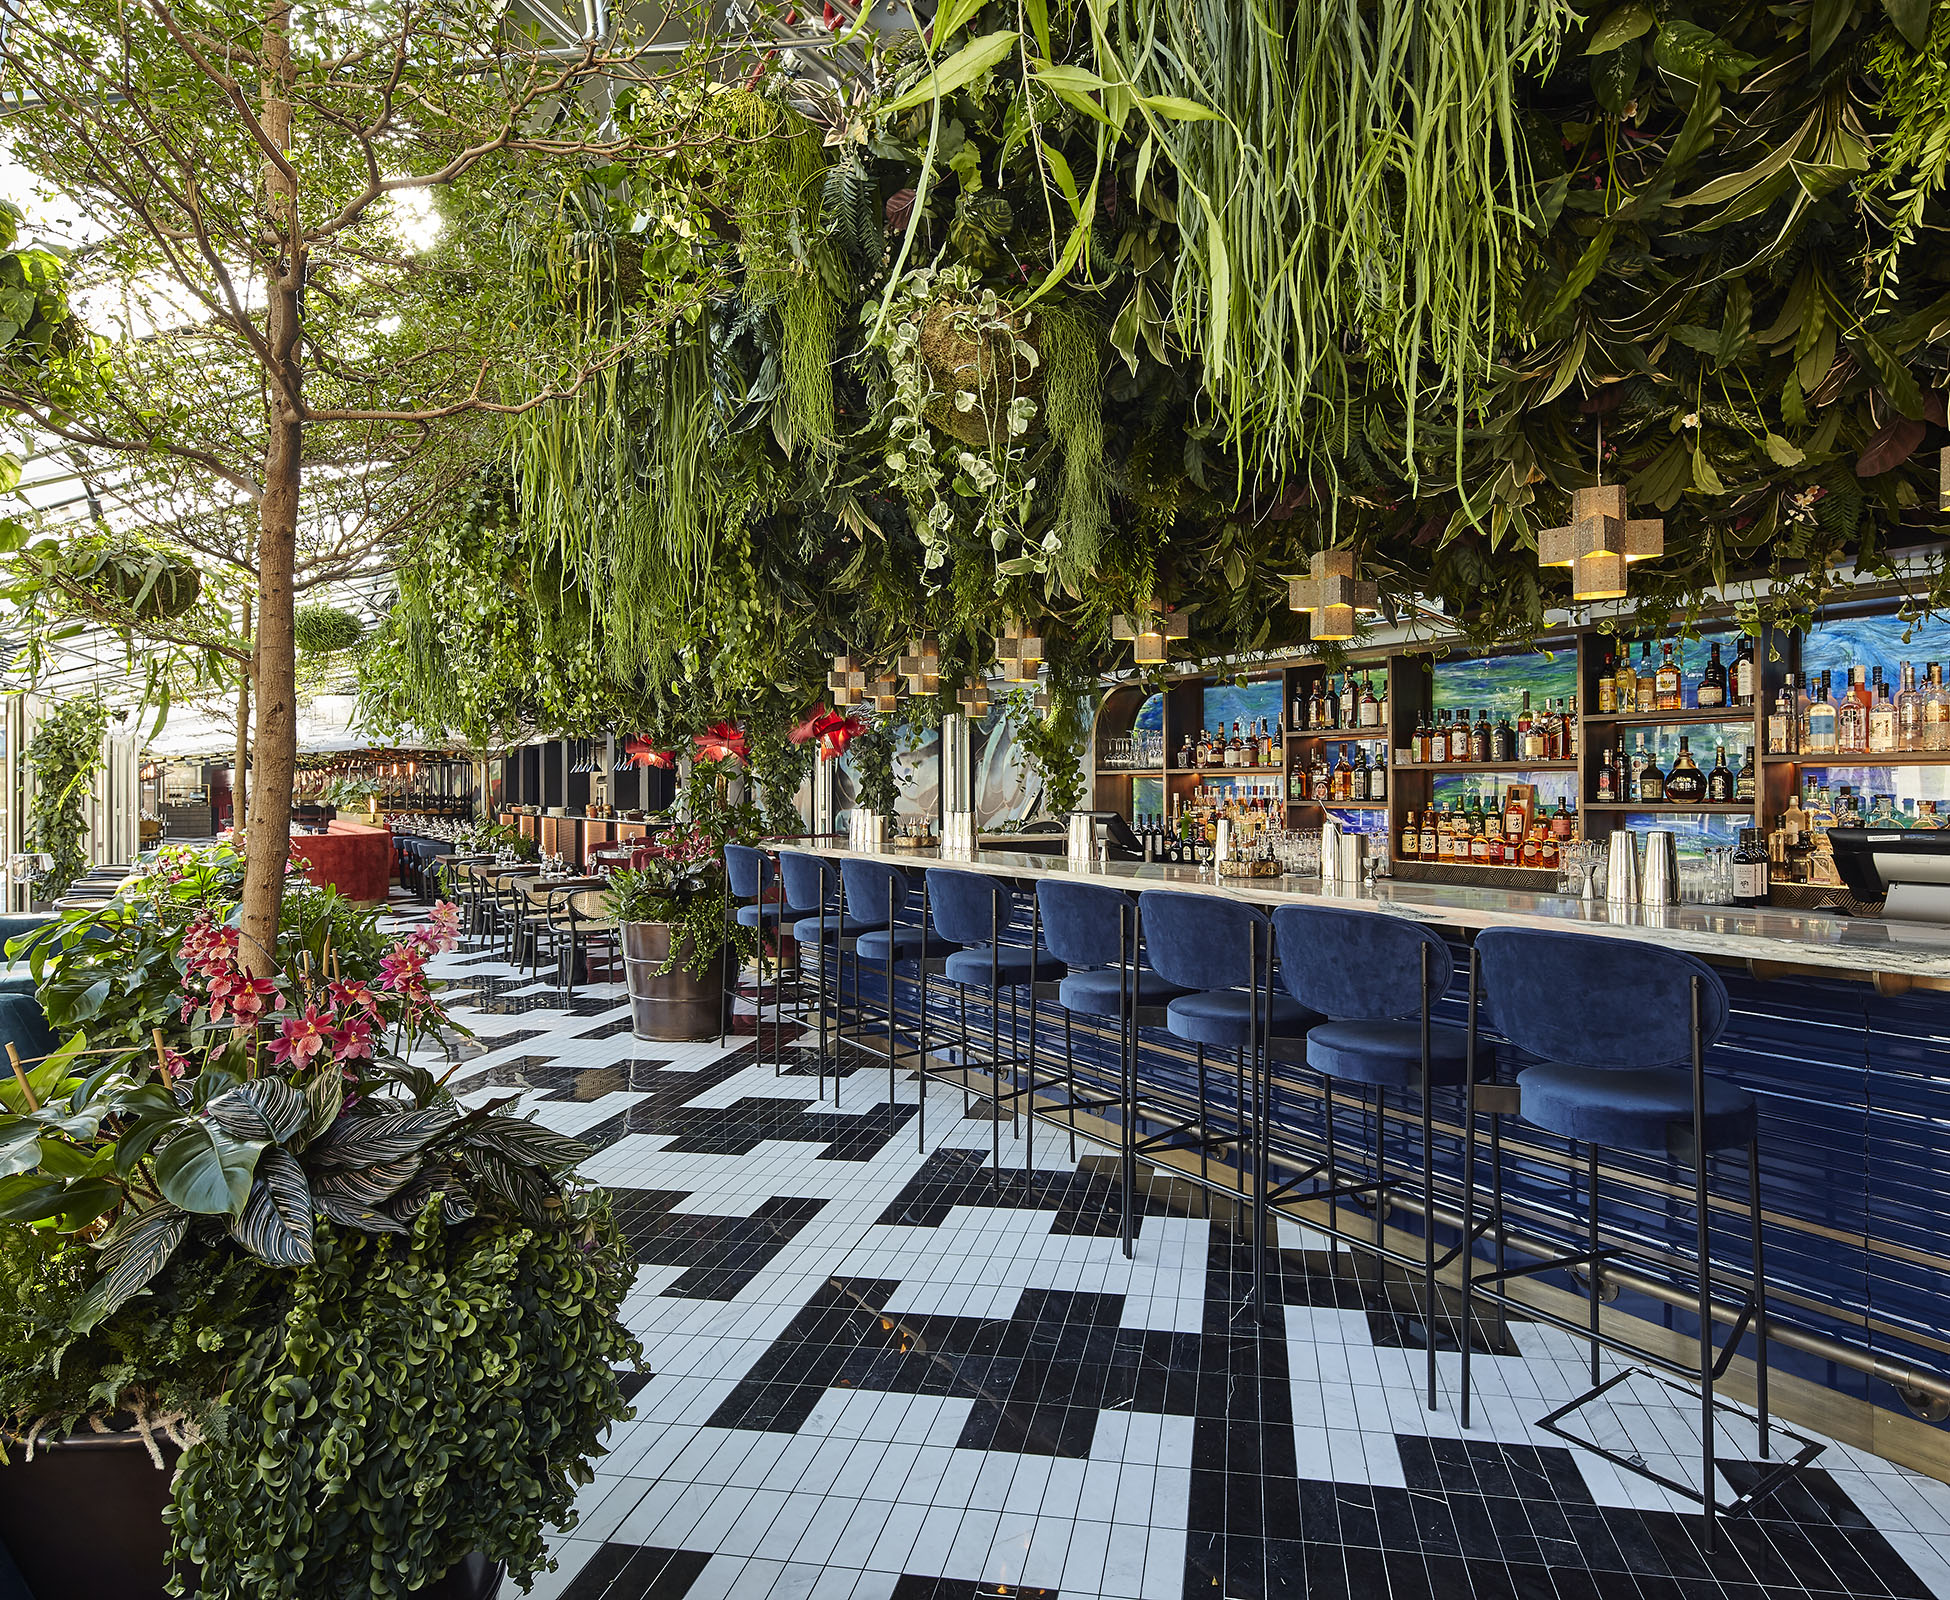 The majestic Bucida trees create a dramatic focal view as you enter Sushisamba Covent Garden, forming an avenue through the dining area and cocktail bar.